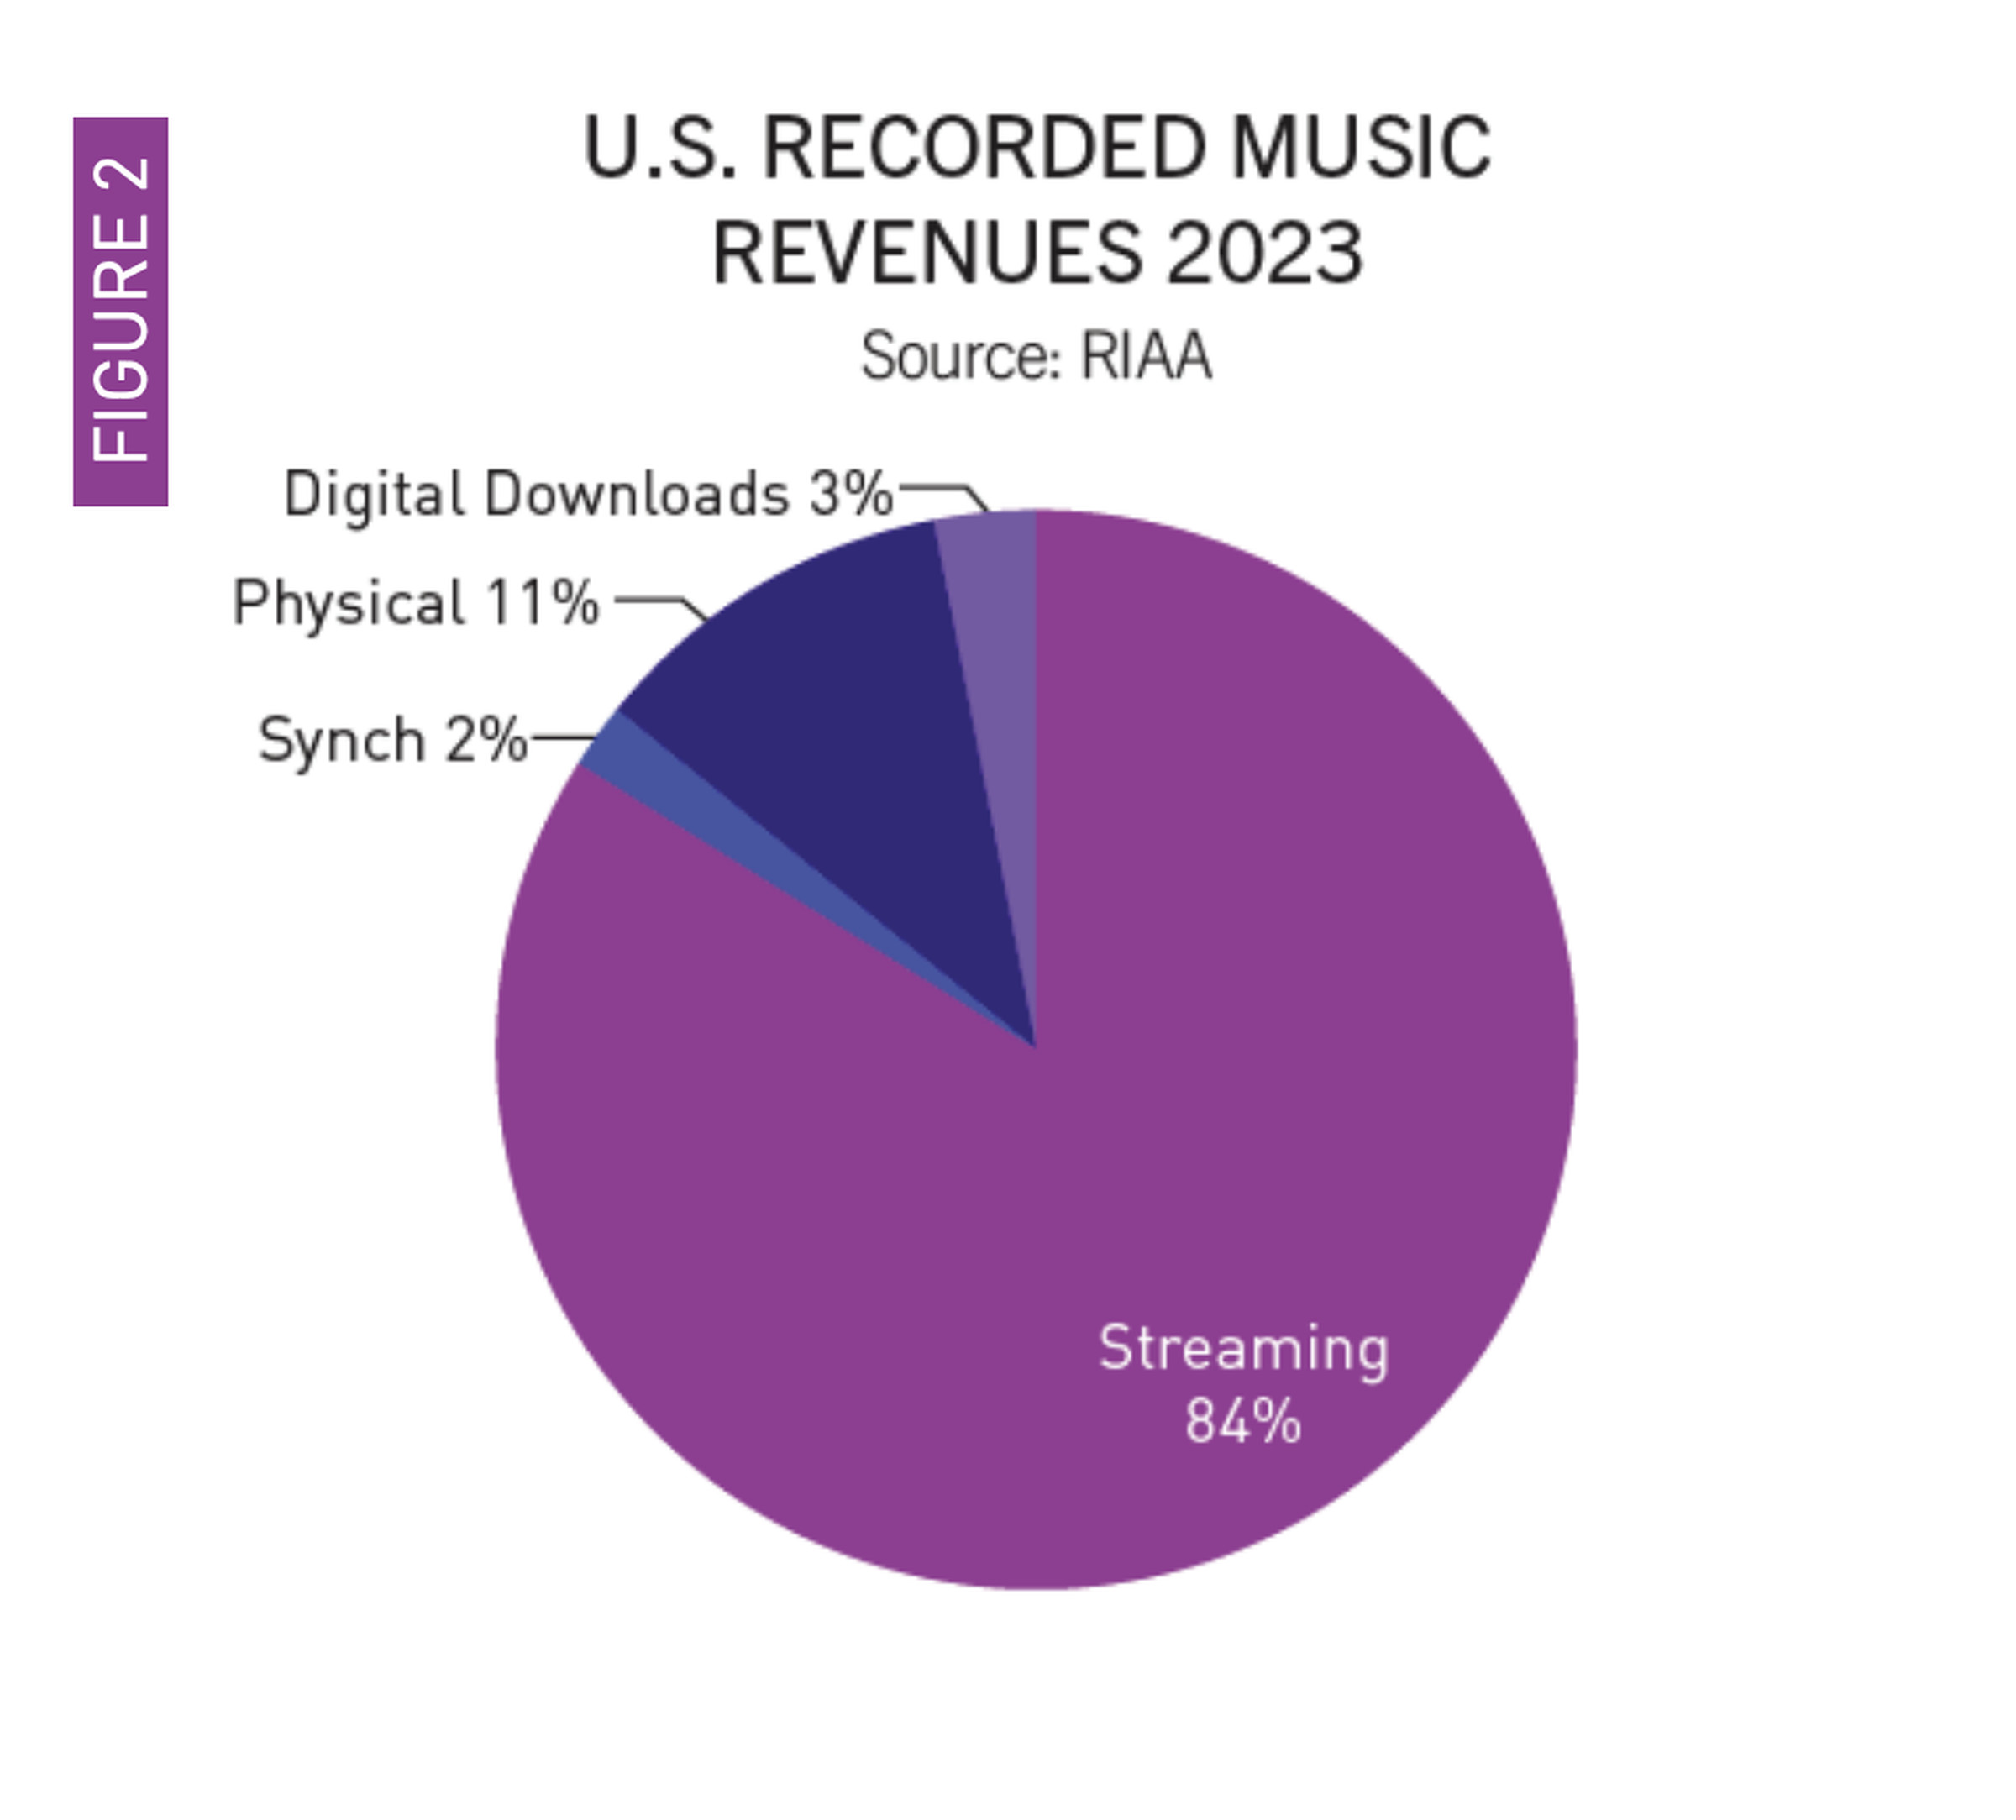 A pie chart showing streaming revenue accounting for 84 percent while physical media takes up 11 percent, leaving five percent for digital downloads and synchronization.